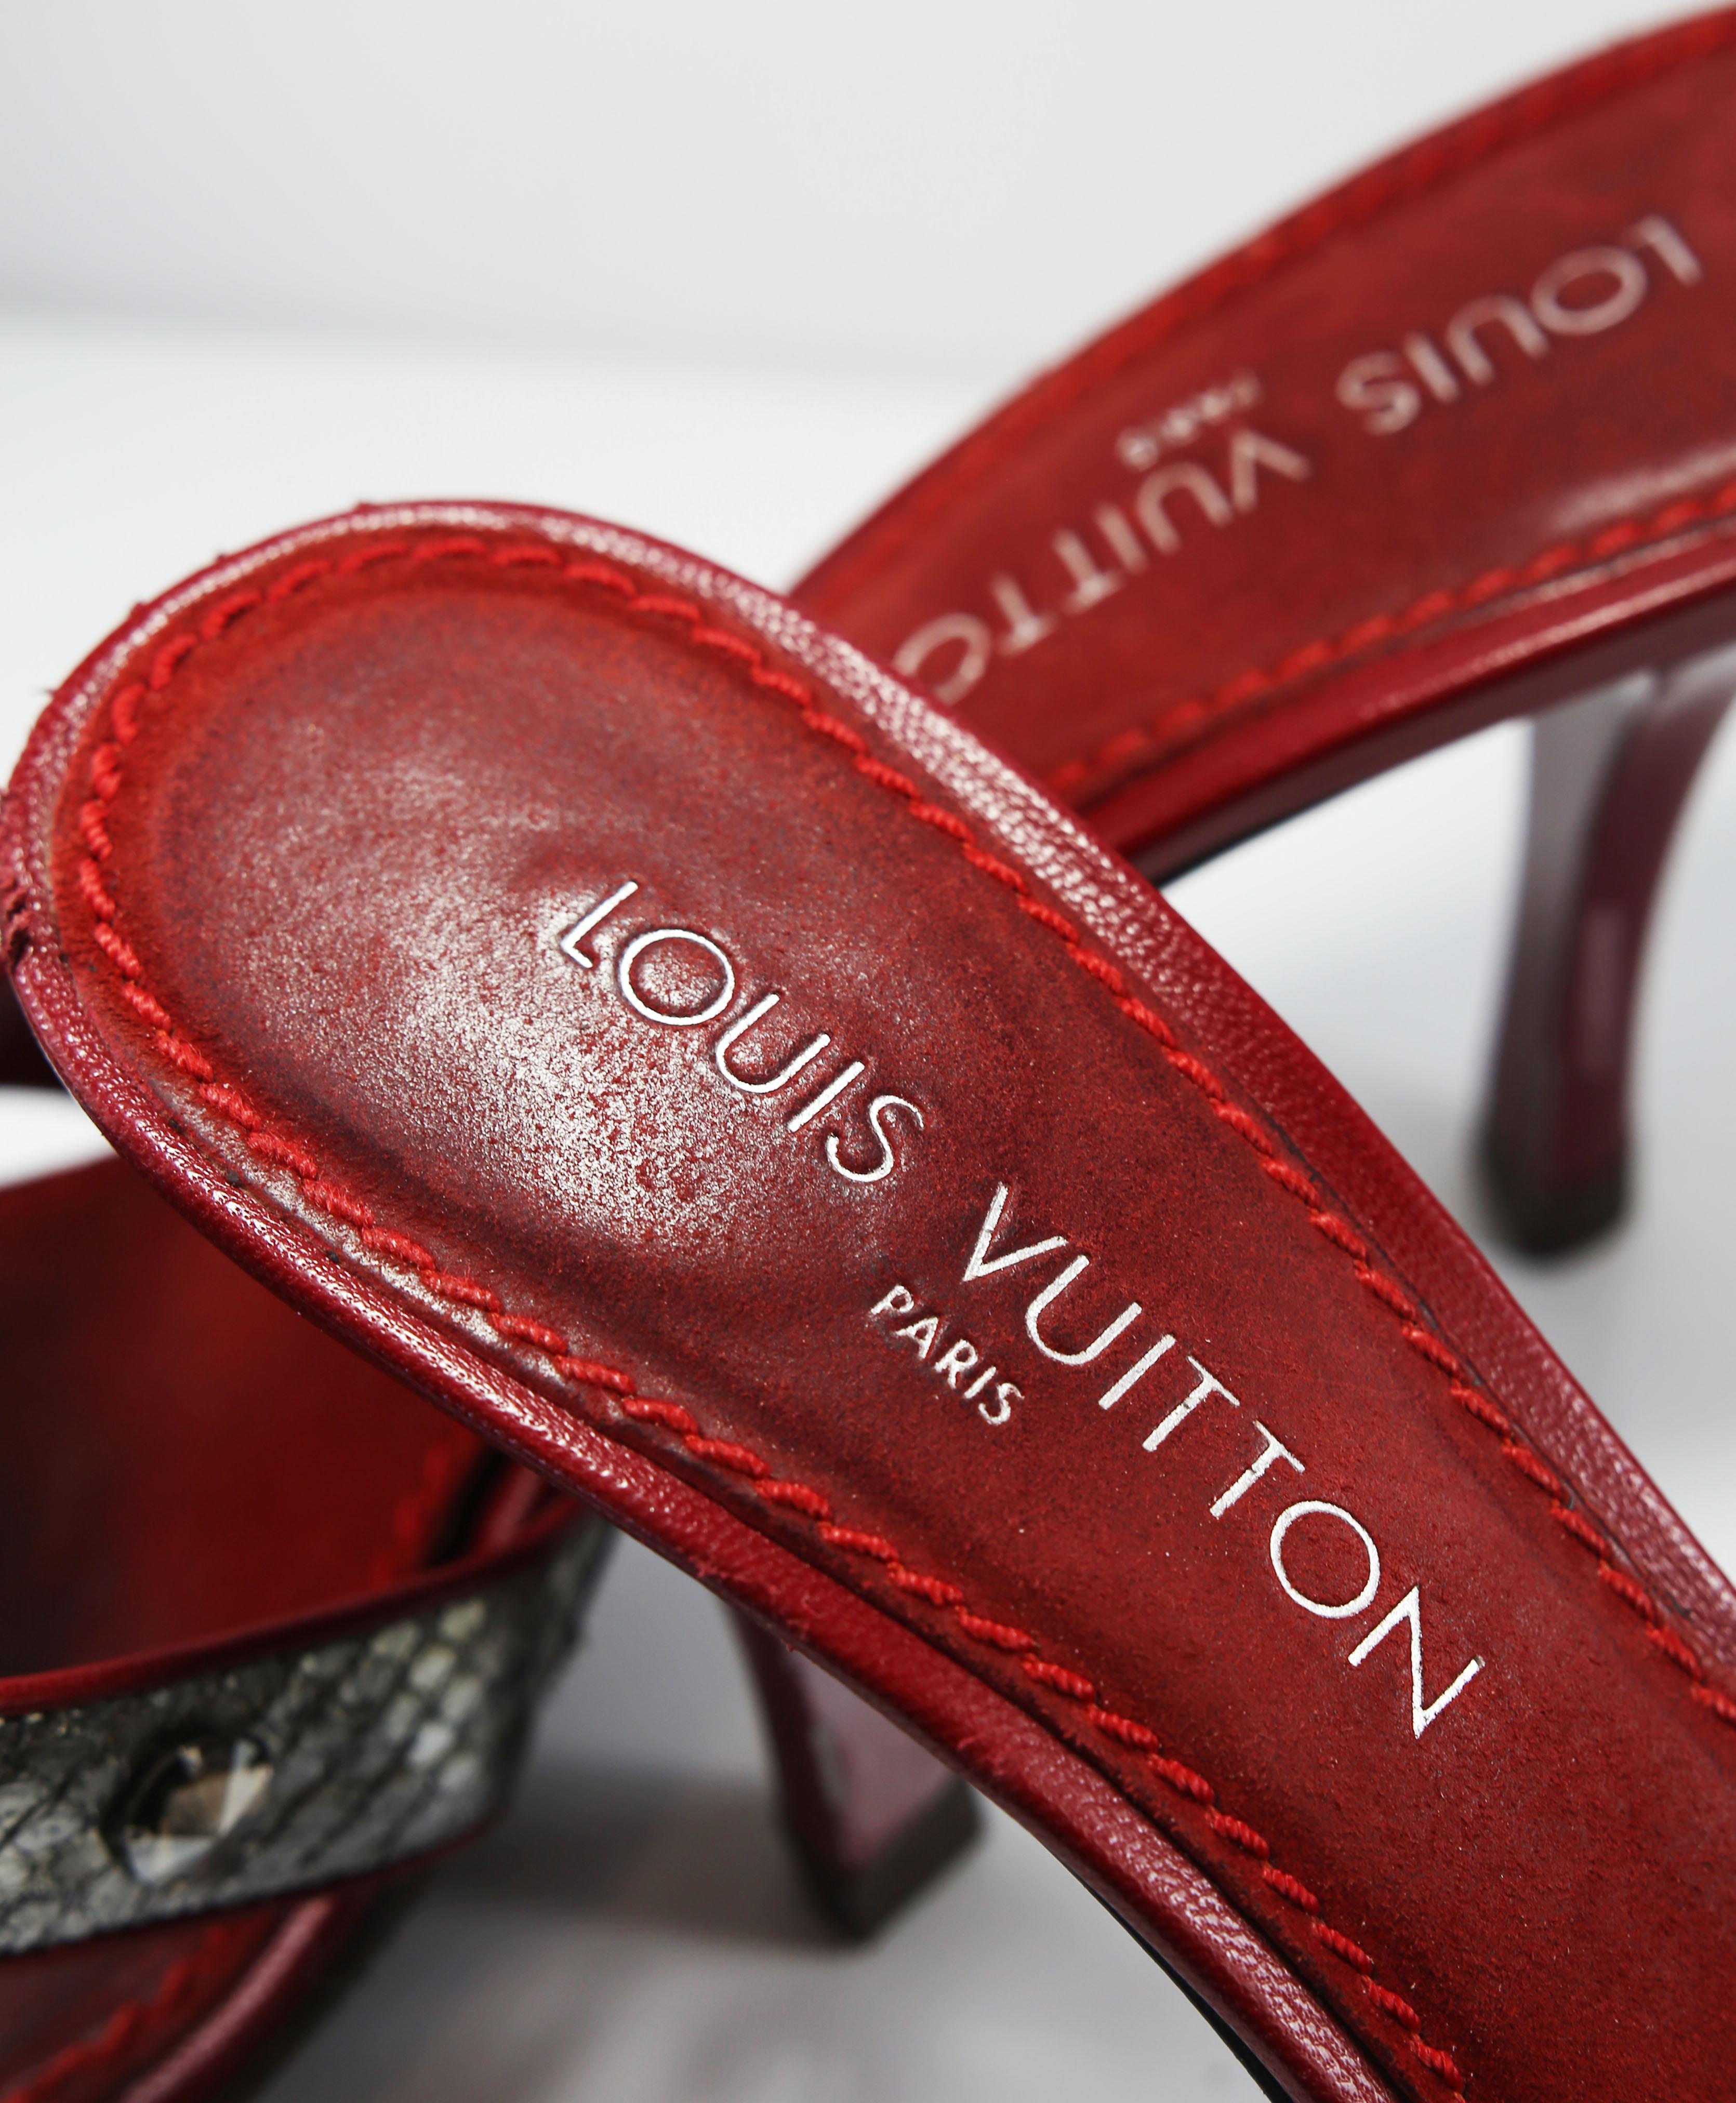 Louis Vuitton Takashi Murakami Monogram Satin Cherry Blossom Open Toe Sandal 
Made In: France 
Color: Red Bourdeaux
Materials: Leather
Closure/Opening: Slip-on
Overall Condition: Very good pre-owned condition, restored soles, the hardware and the